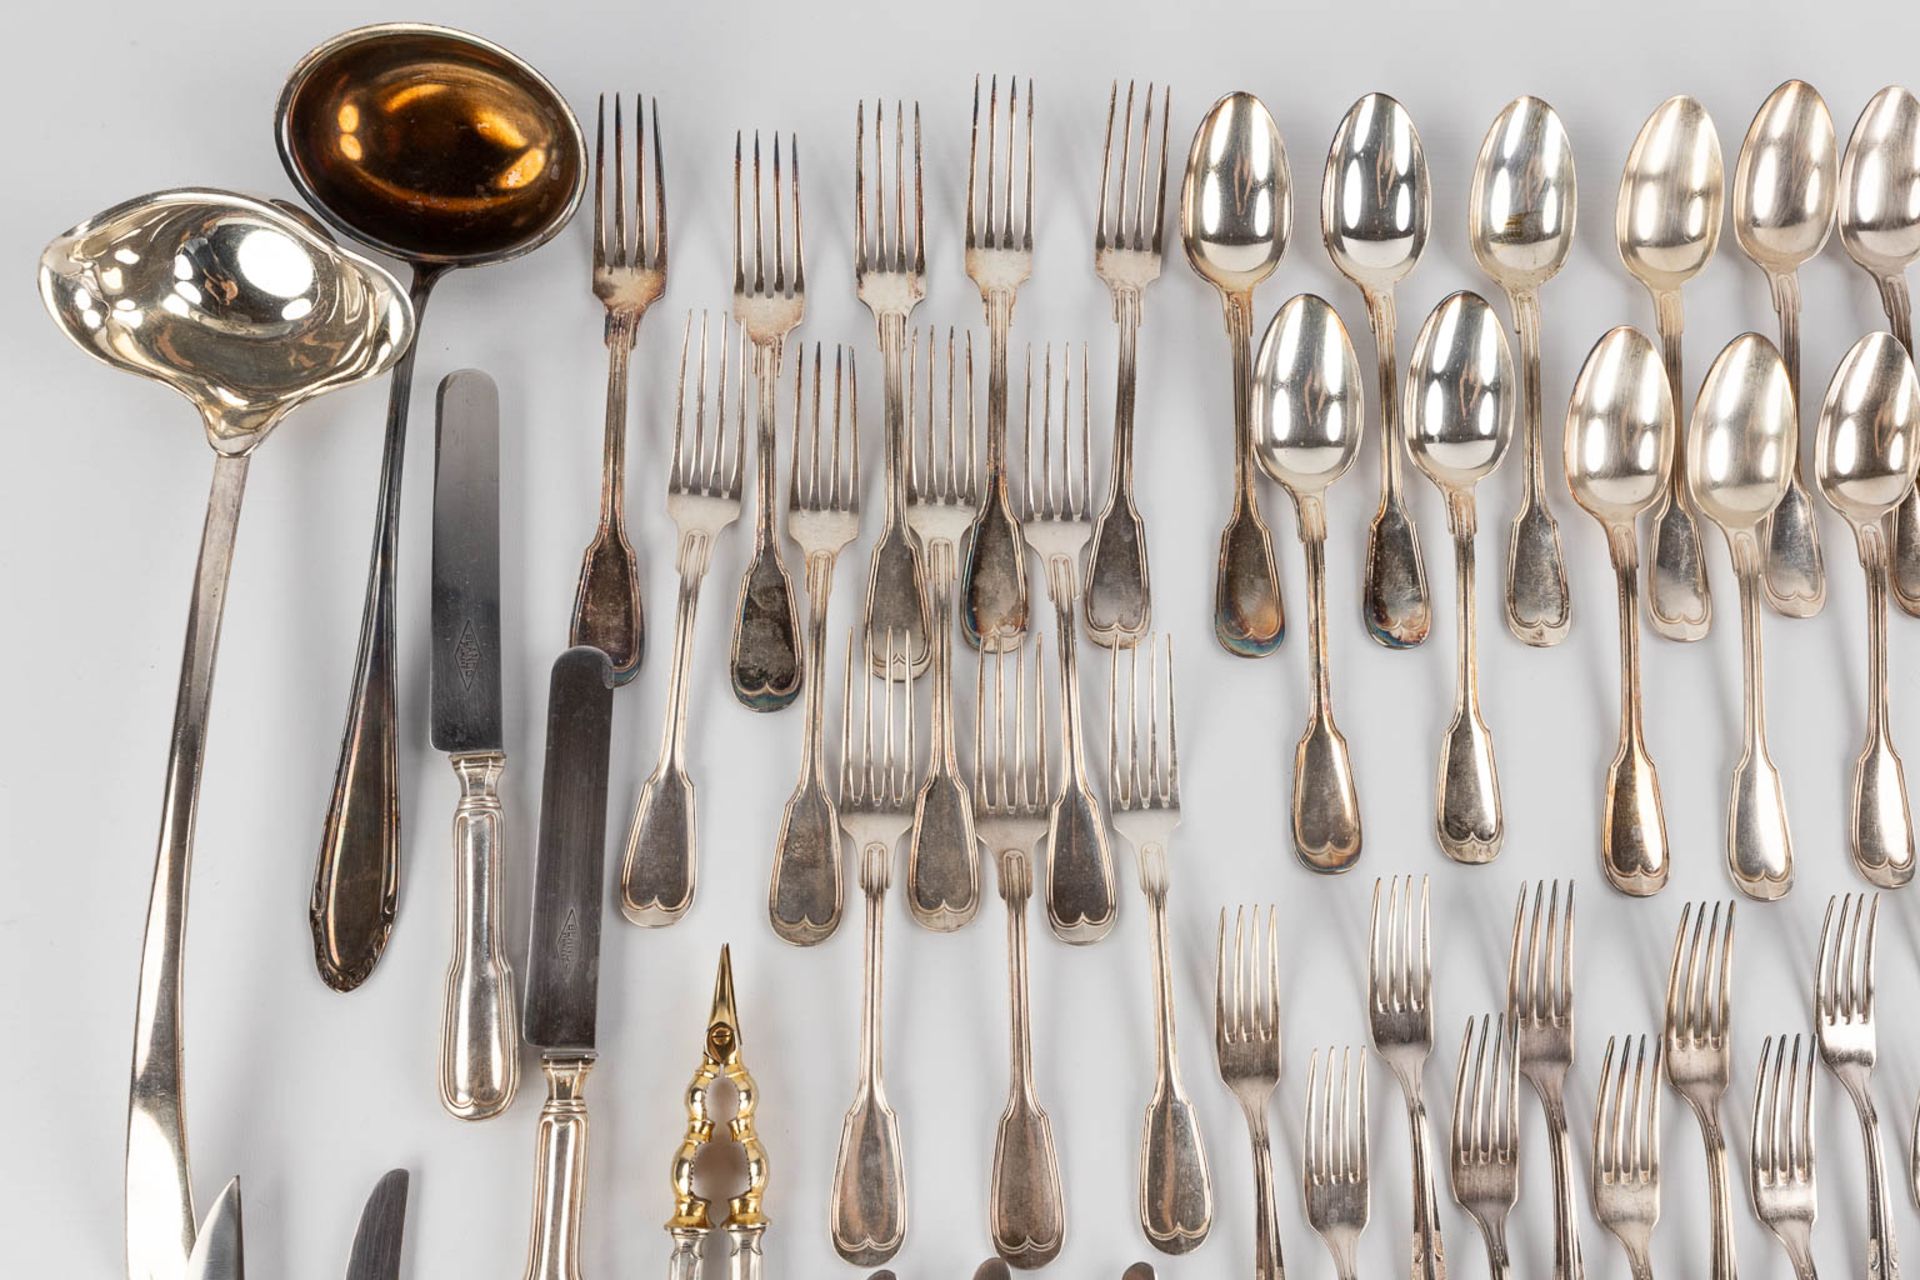 A large collection of serving accessories and cutlery, silver-plated metal. (W:35 cm) - Image 9 of 9